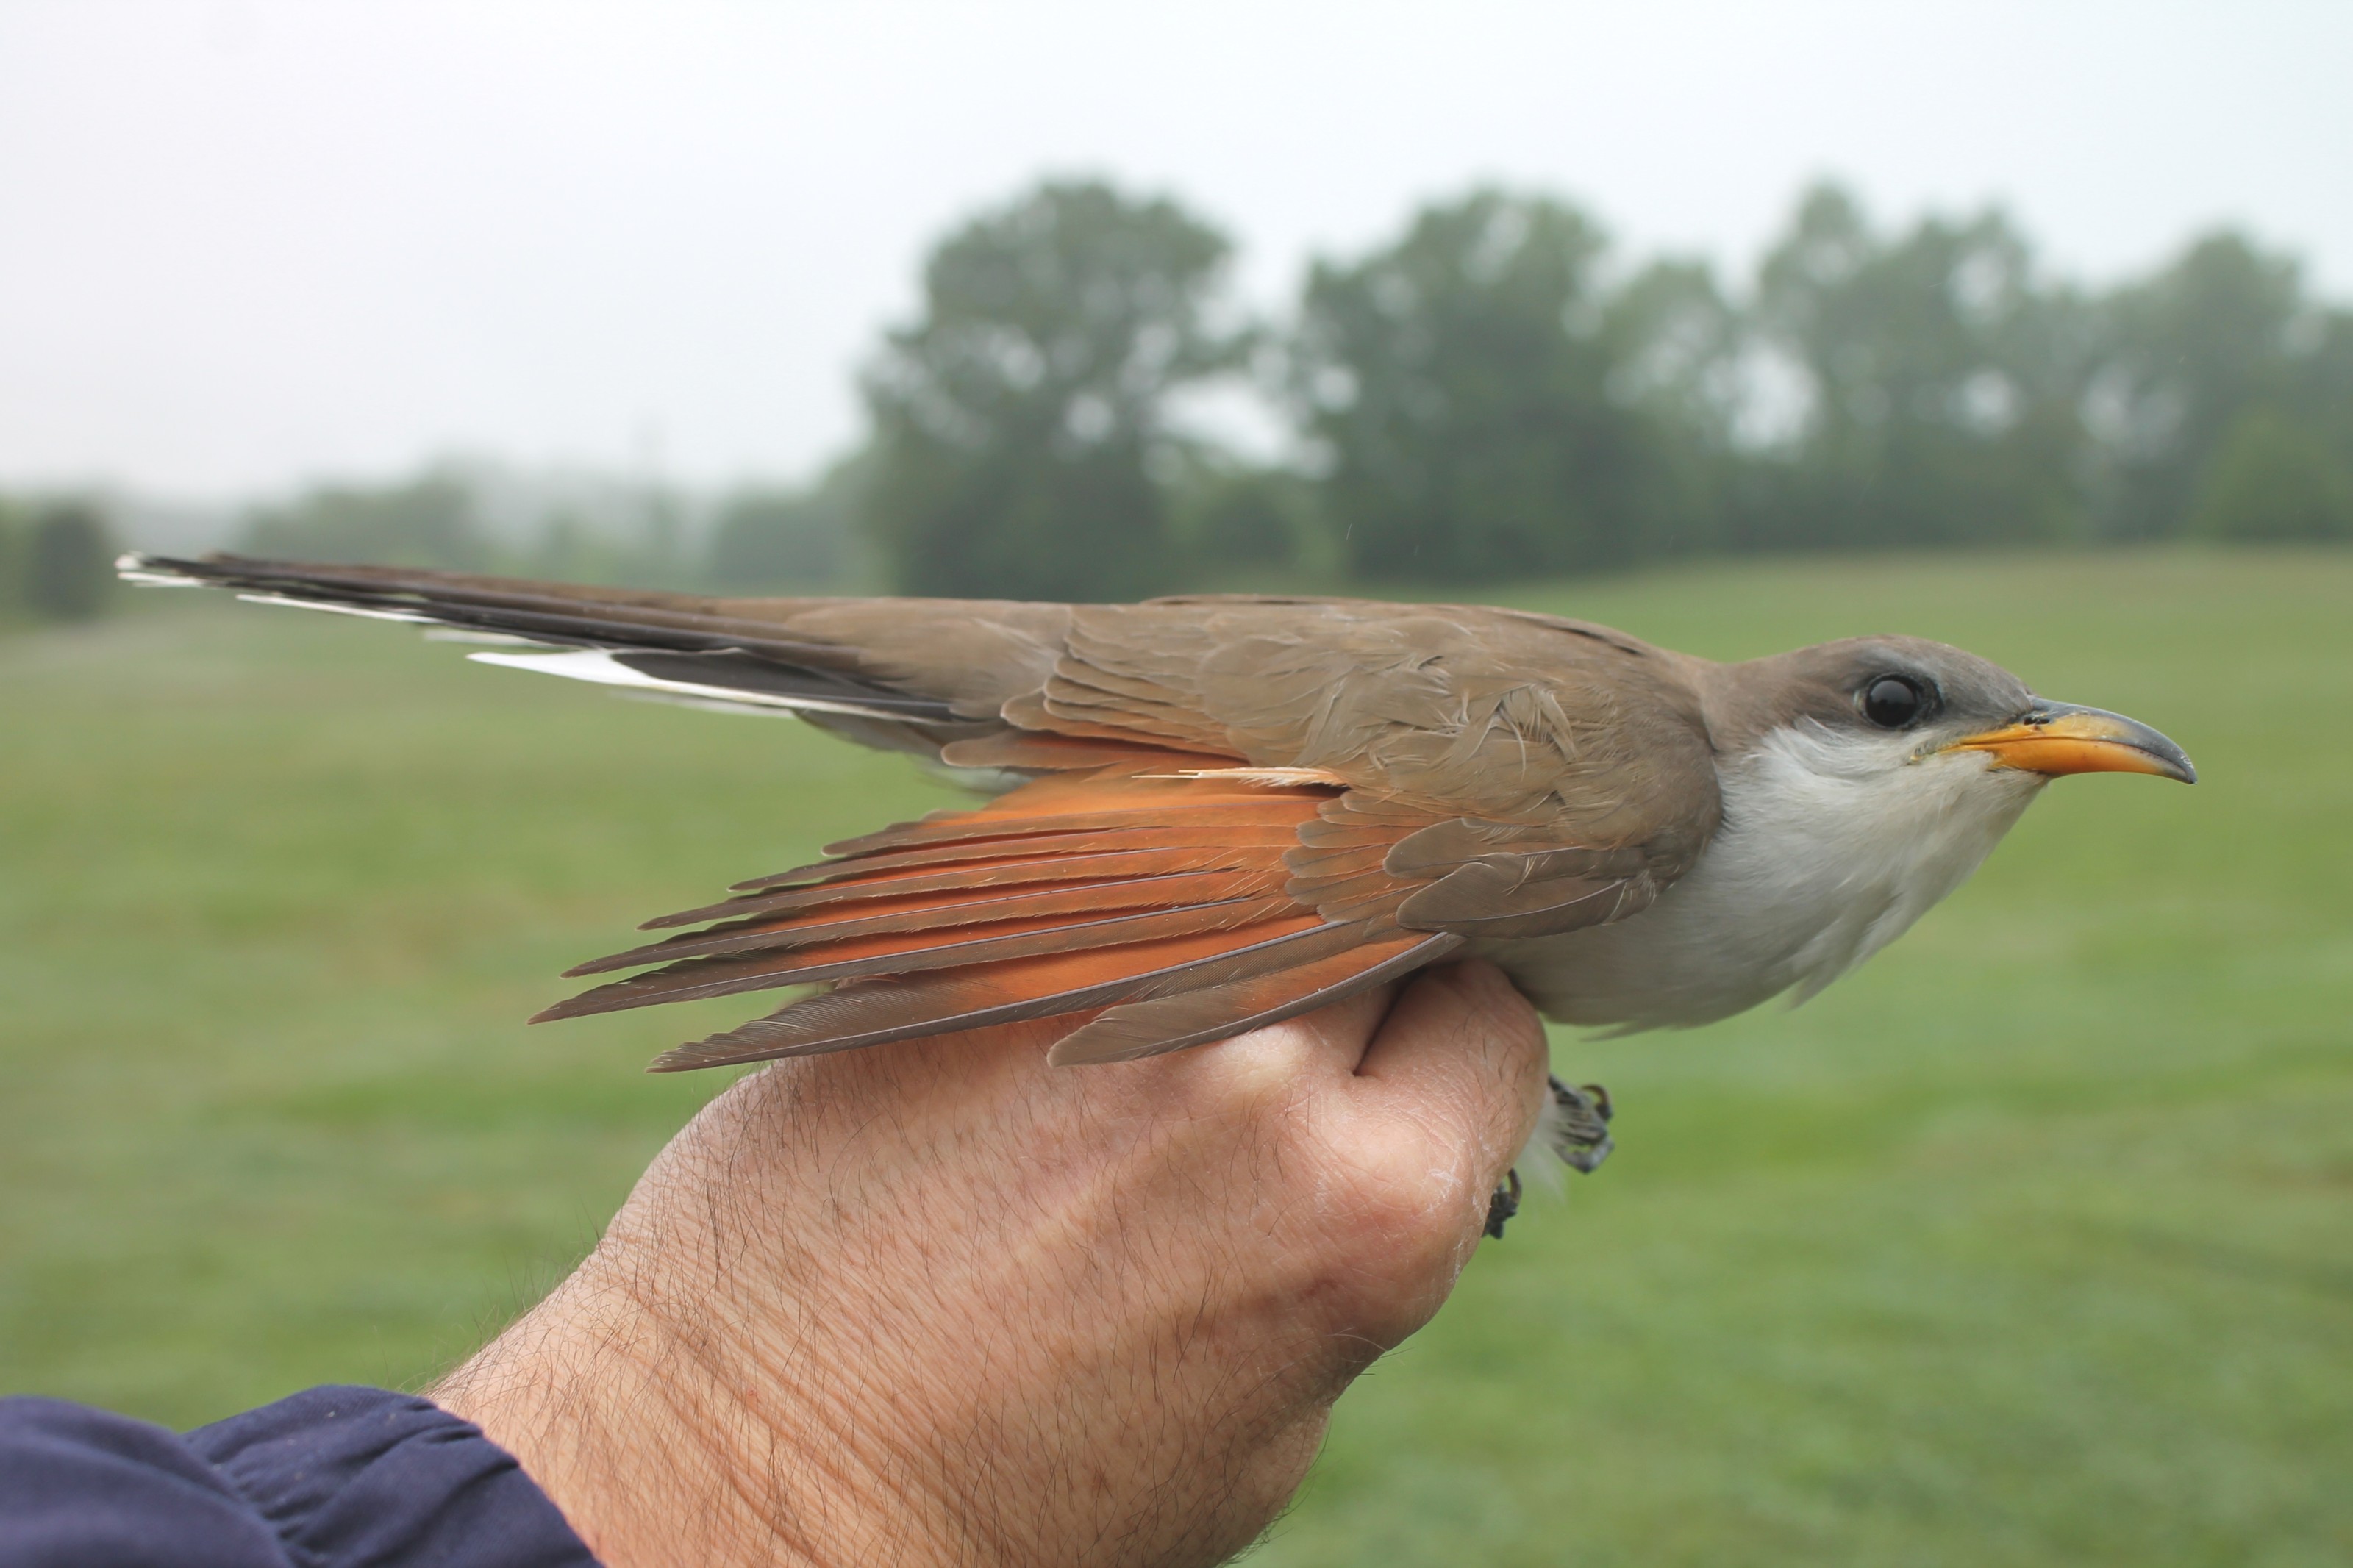 A yellow-billed cuckoo in a person's hand